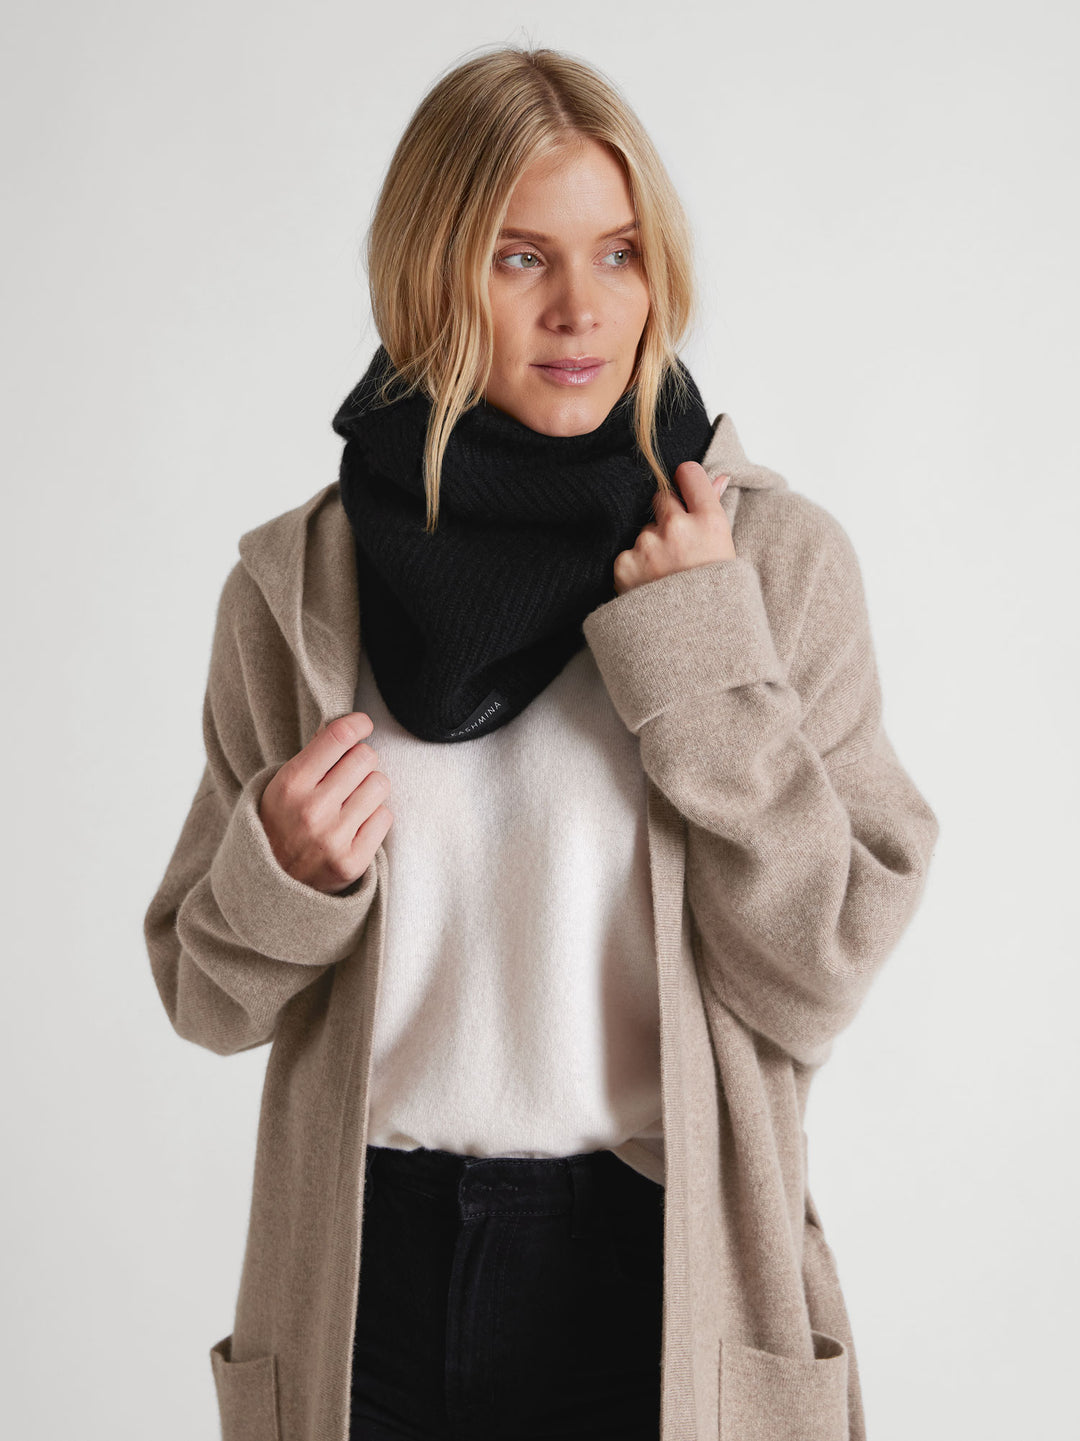 Rib knitted cashmere snood / scarf "Erika" in 100% pure cashmere. Scandinavian design by Kashmina. Color: Black.